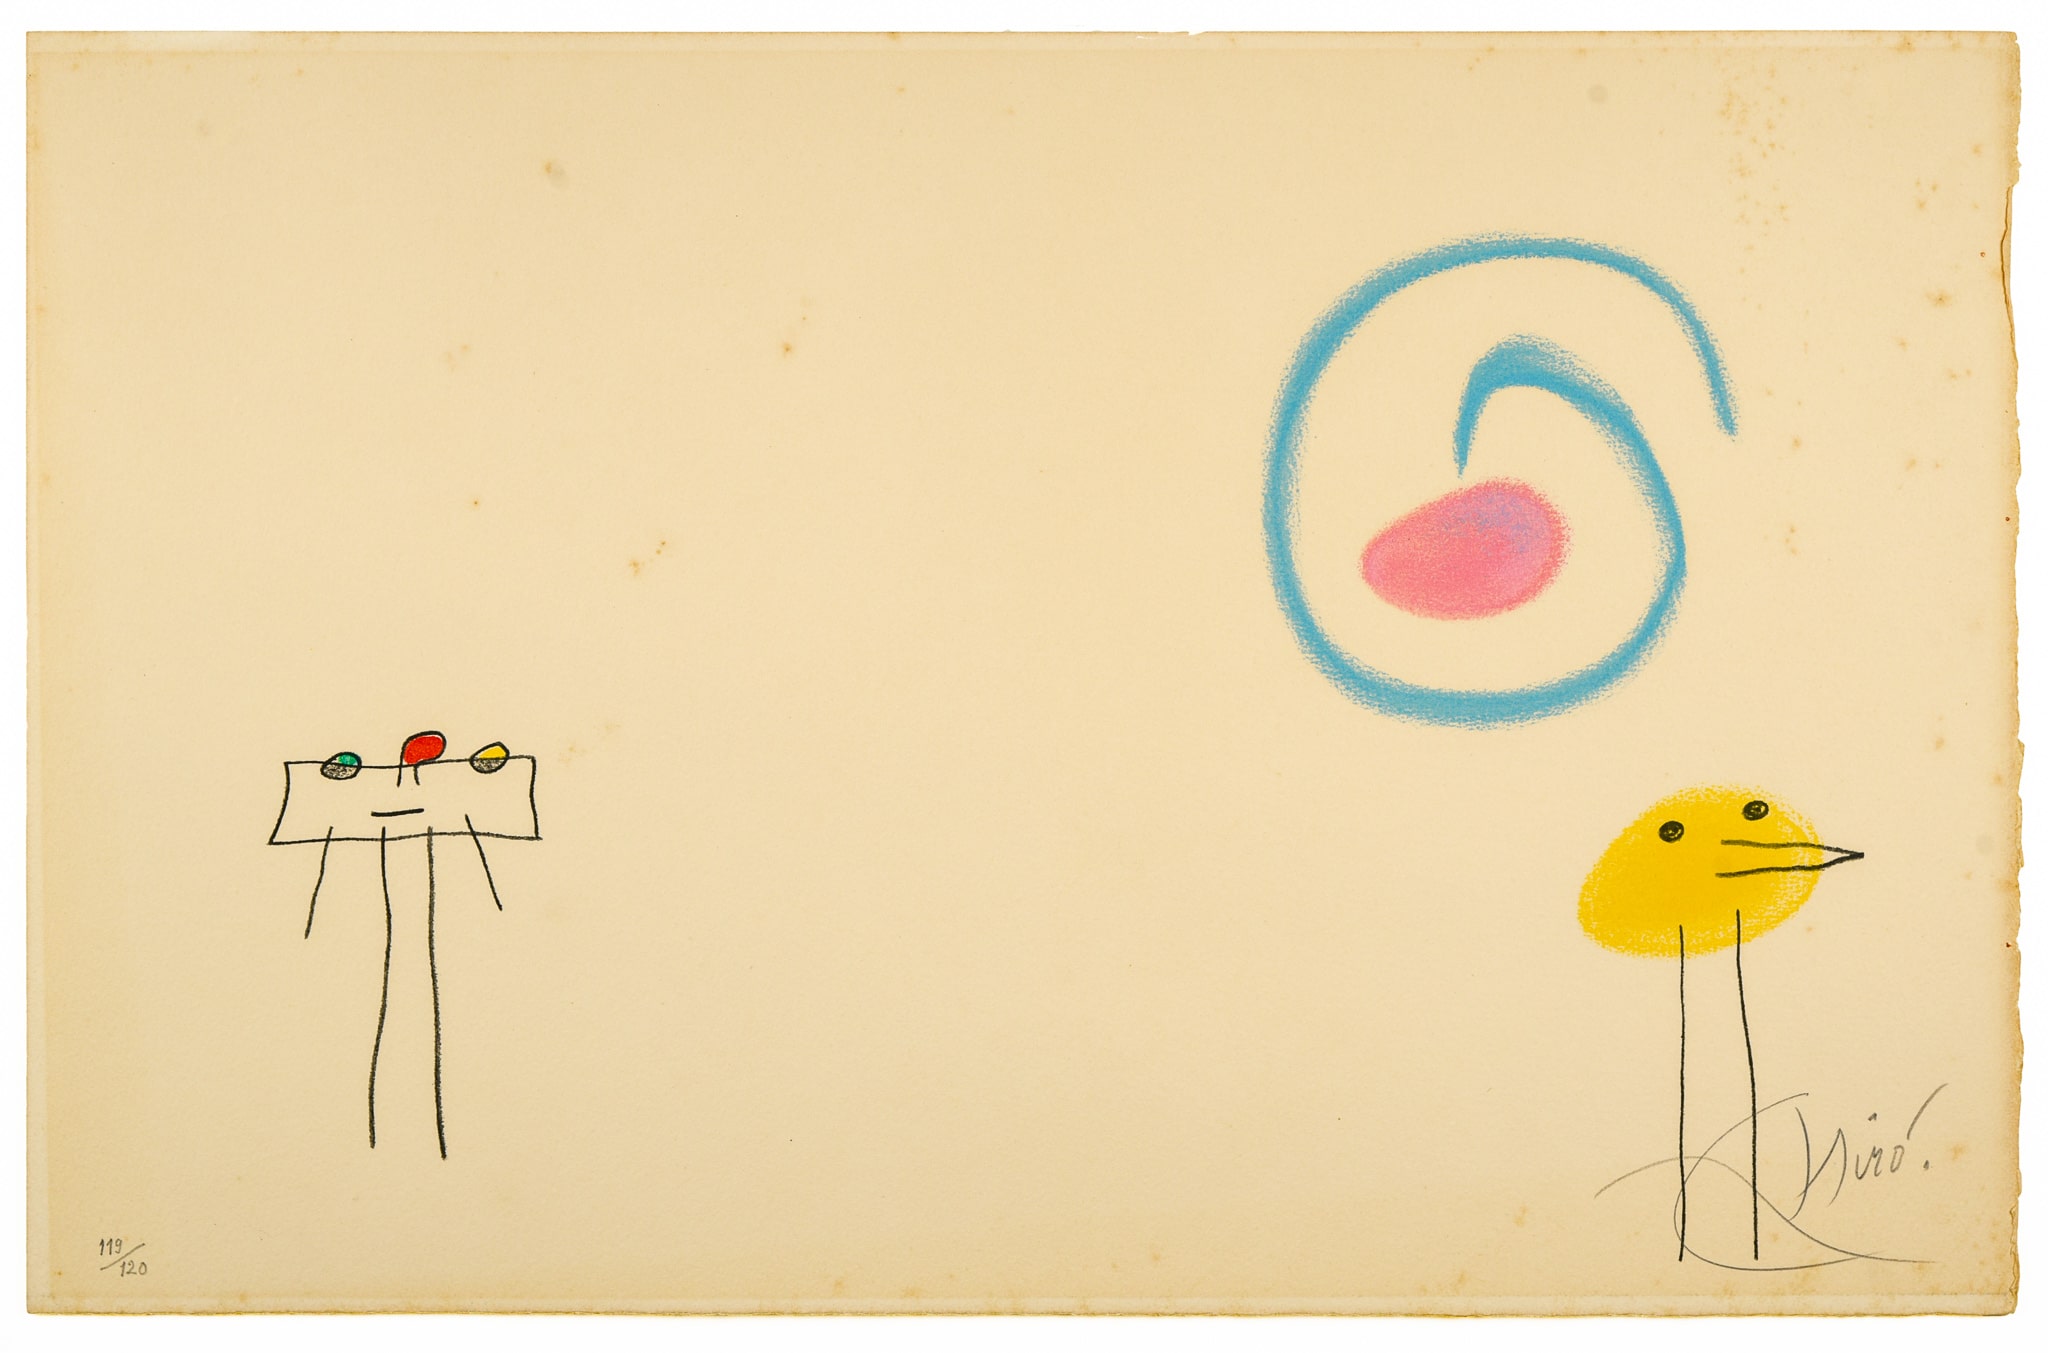 Joan Miró (1893-1983)
L’Enfance d’Ubu, 1975
Color lithograph
13 x 20 inches
Edition 119 of 120
Accession Number 002.1